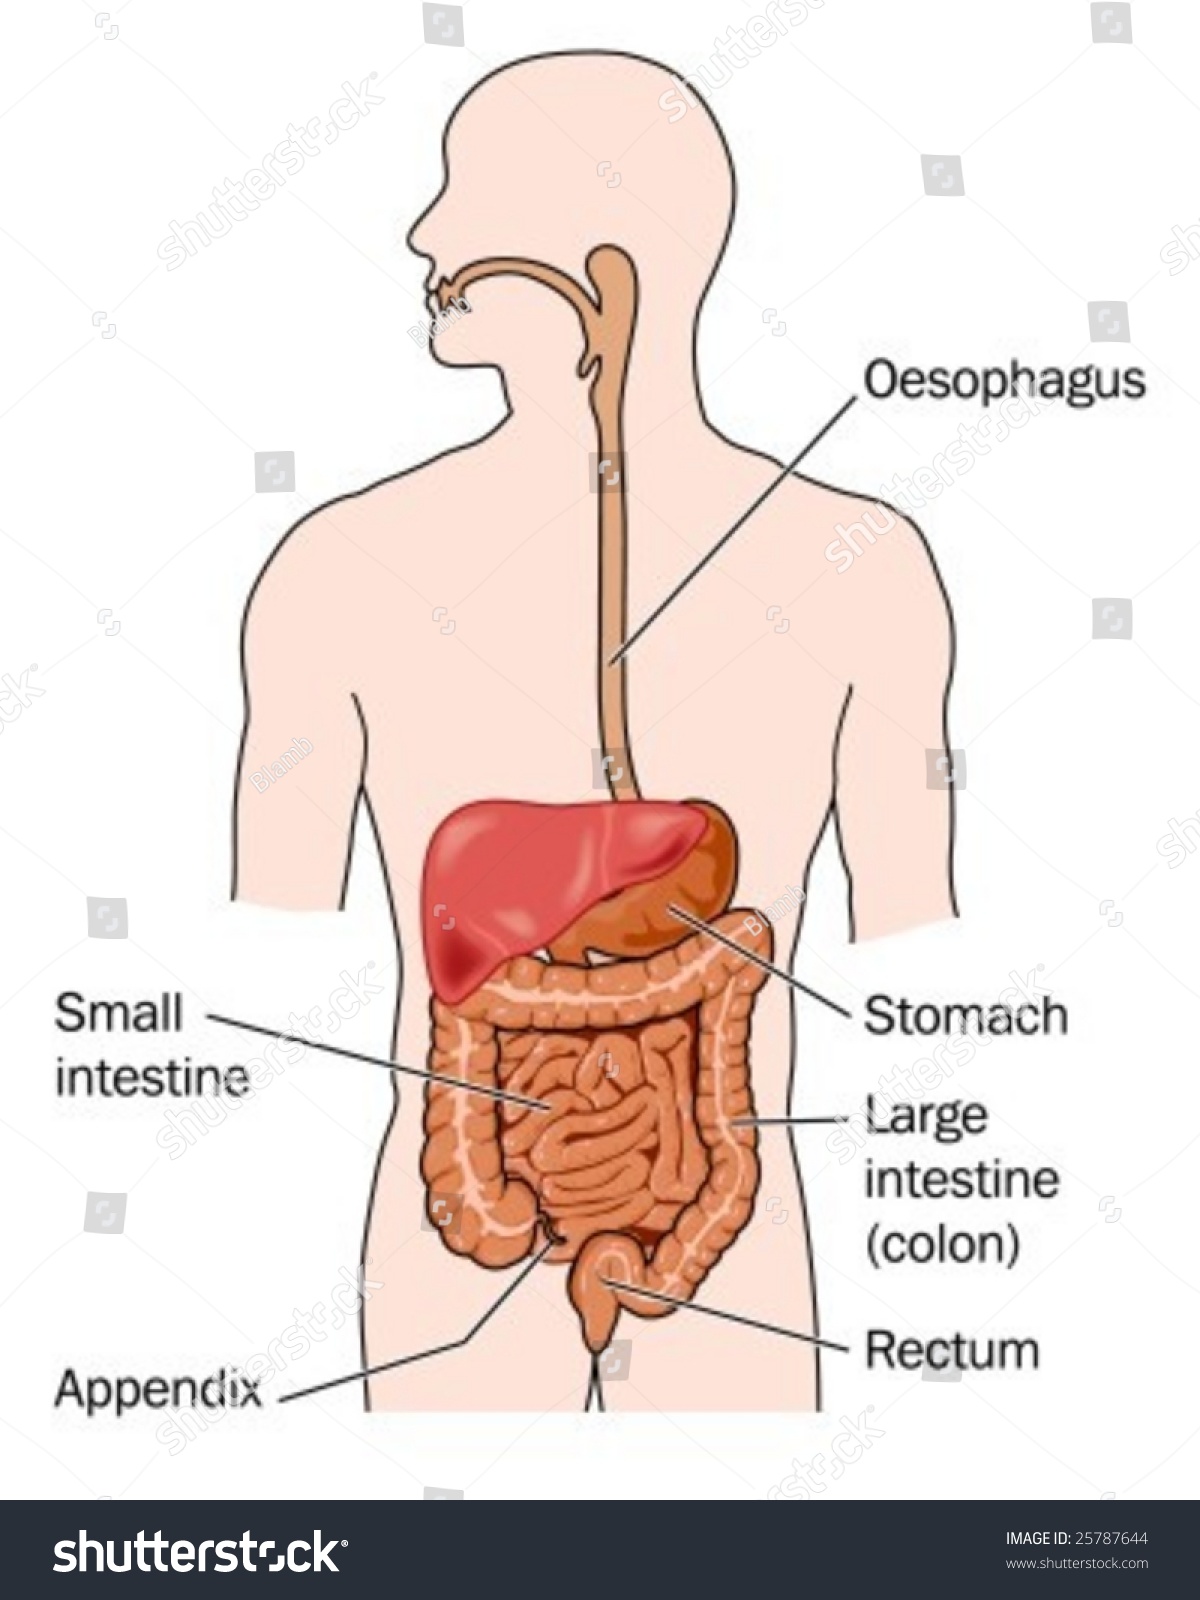 Labeling Pictures Of Digestive System 92